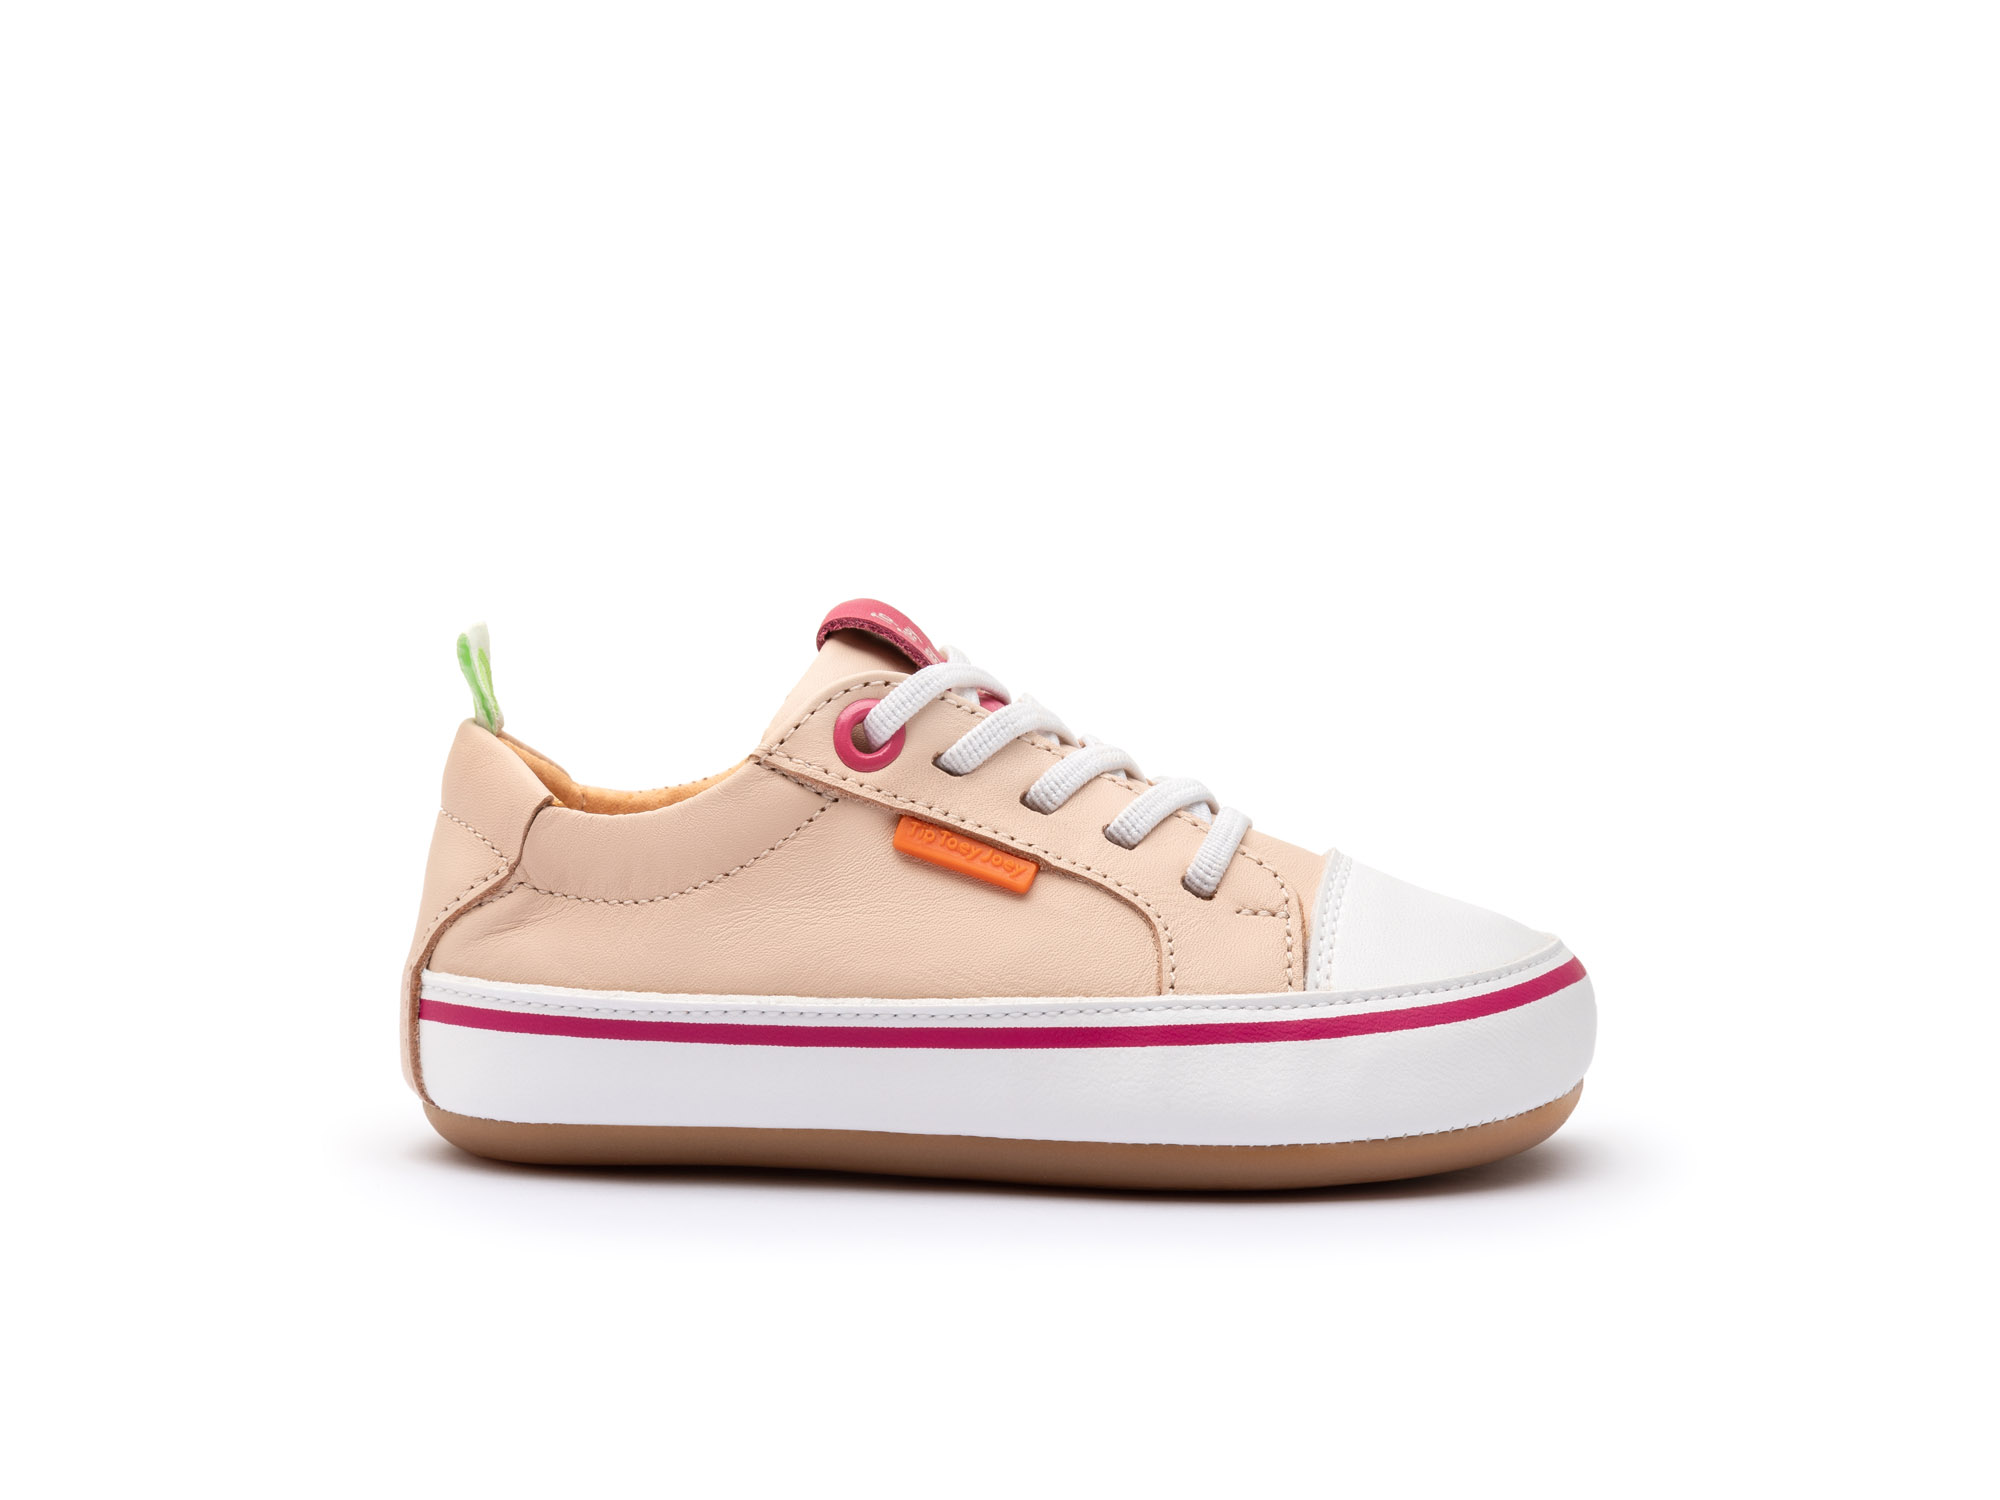 UP & GO Sneakers for Girls Funky Colors | Tip Toey Joey - Australia - 4